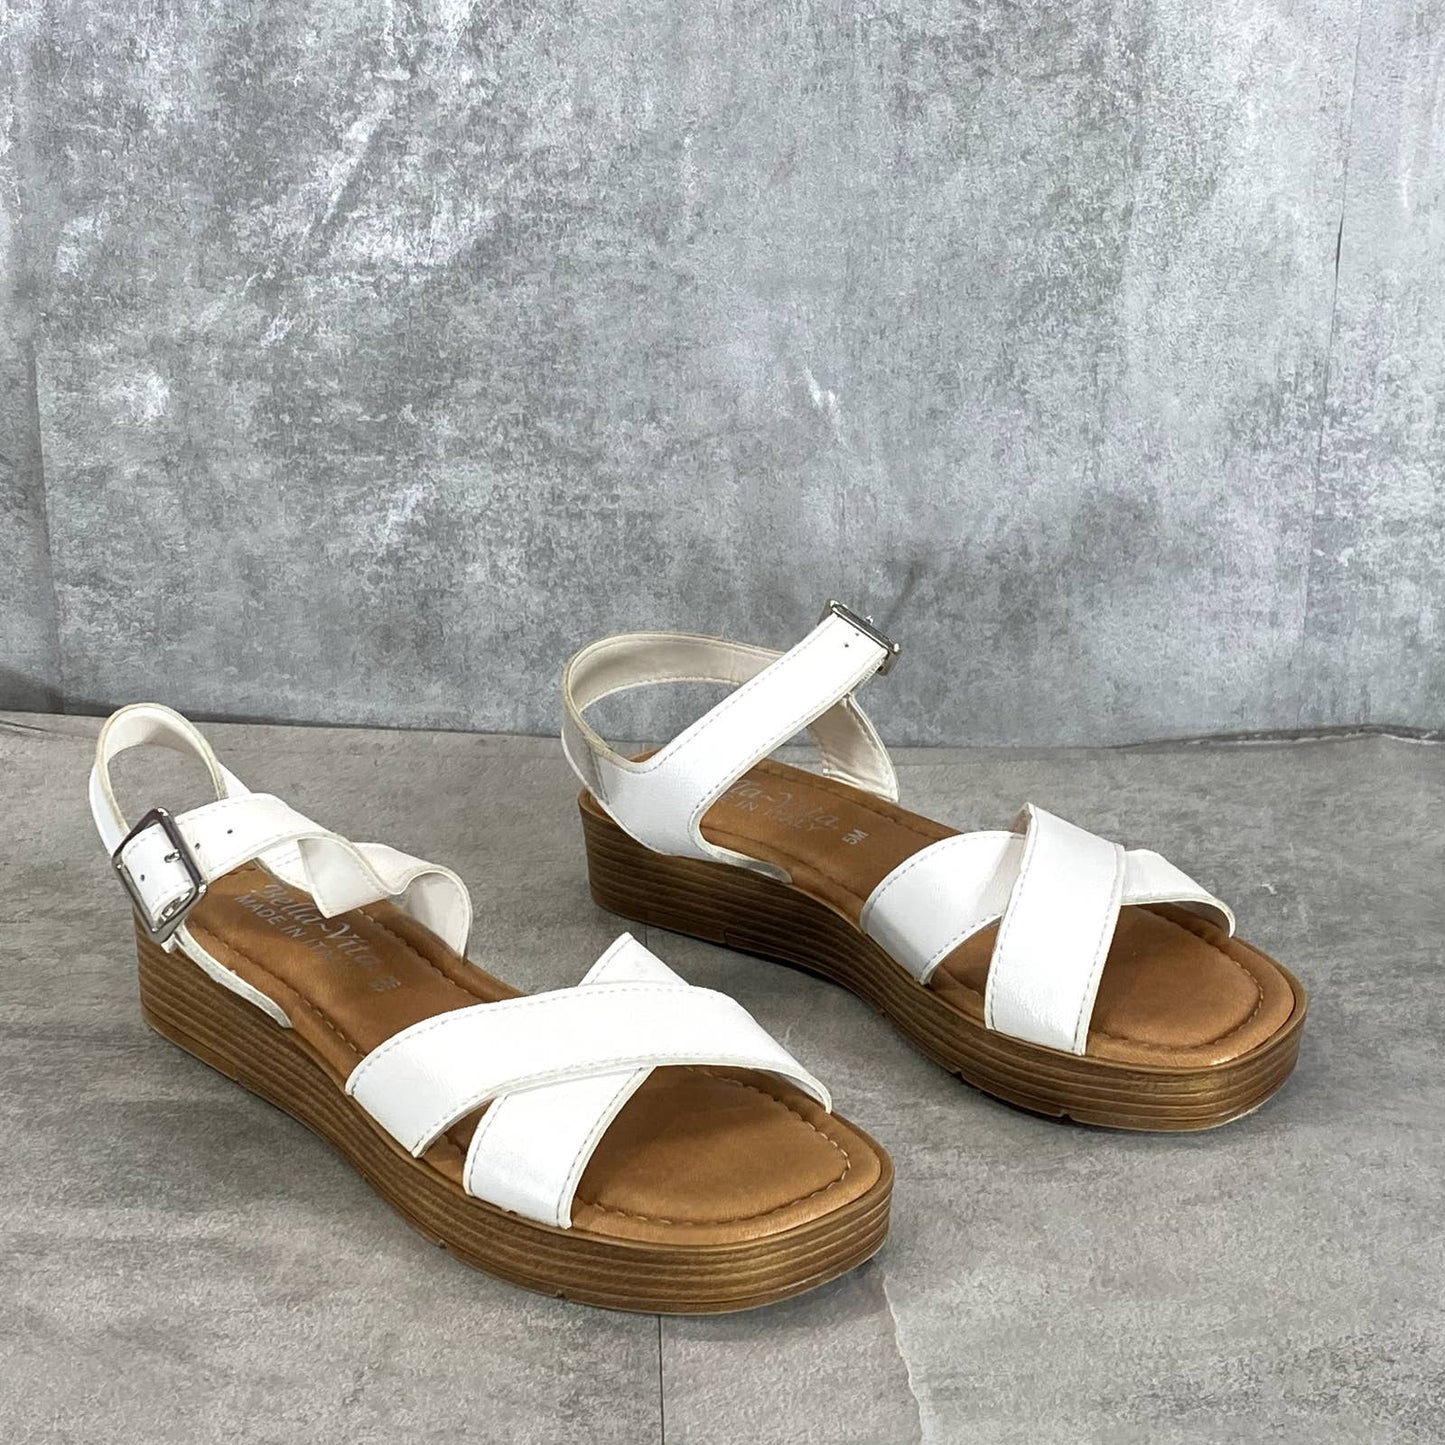 BELLA-VITA Women's White Leather Car-Italy Wedge Ankle-Strap Sandals SZ 5